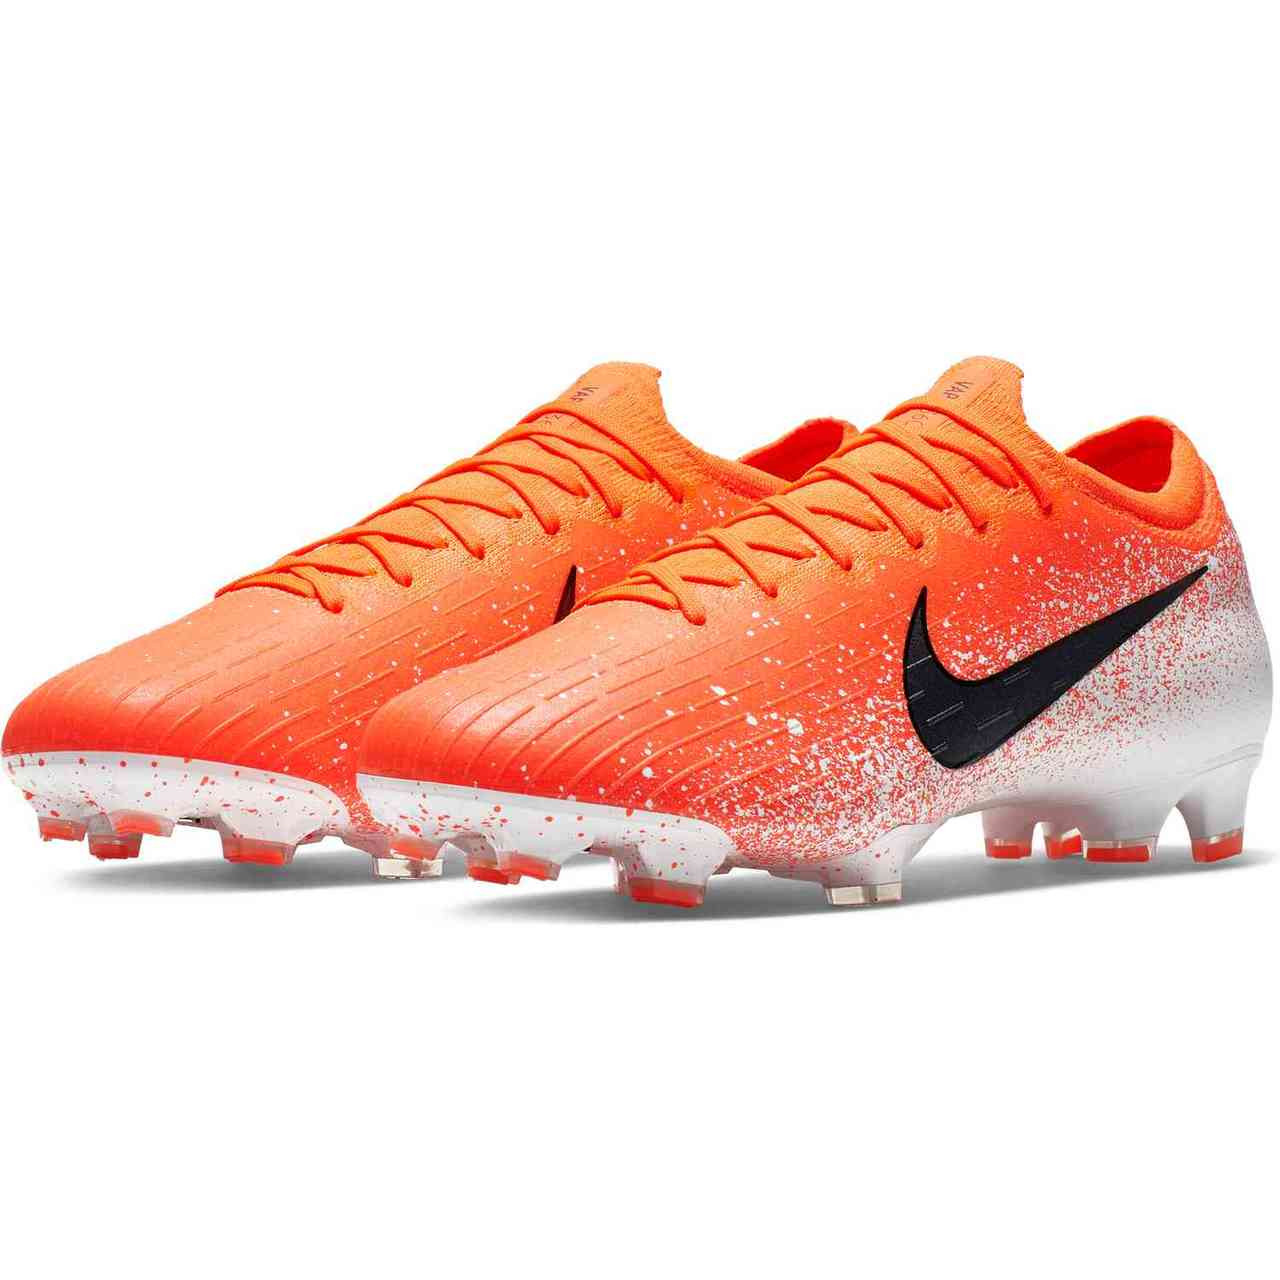 Nike Mercurial Vapor Superfly II Firm Ground Mens Boots